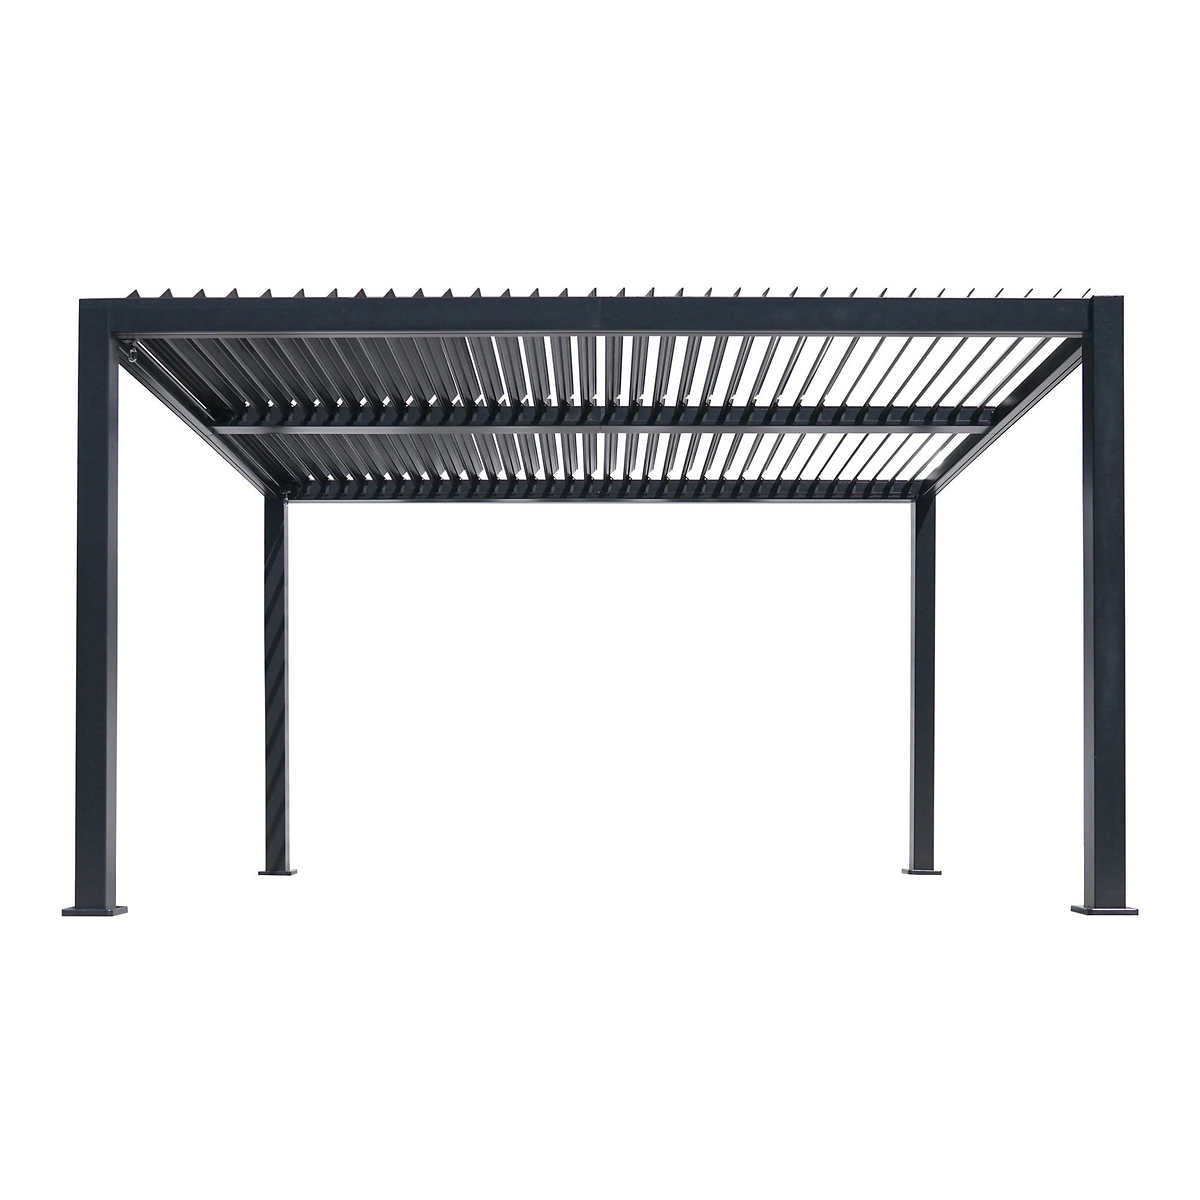 Sojag Hana 10 ft. x 13 ft. Louvered Pergola received without box, needs to be changed by customer before pickup, no manual, little scratches and dents, sold as is